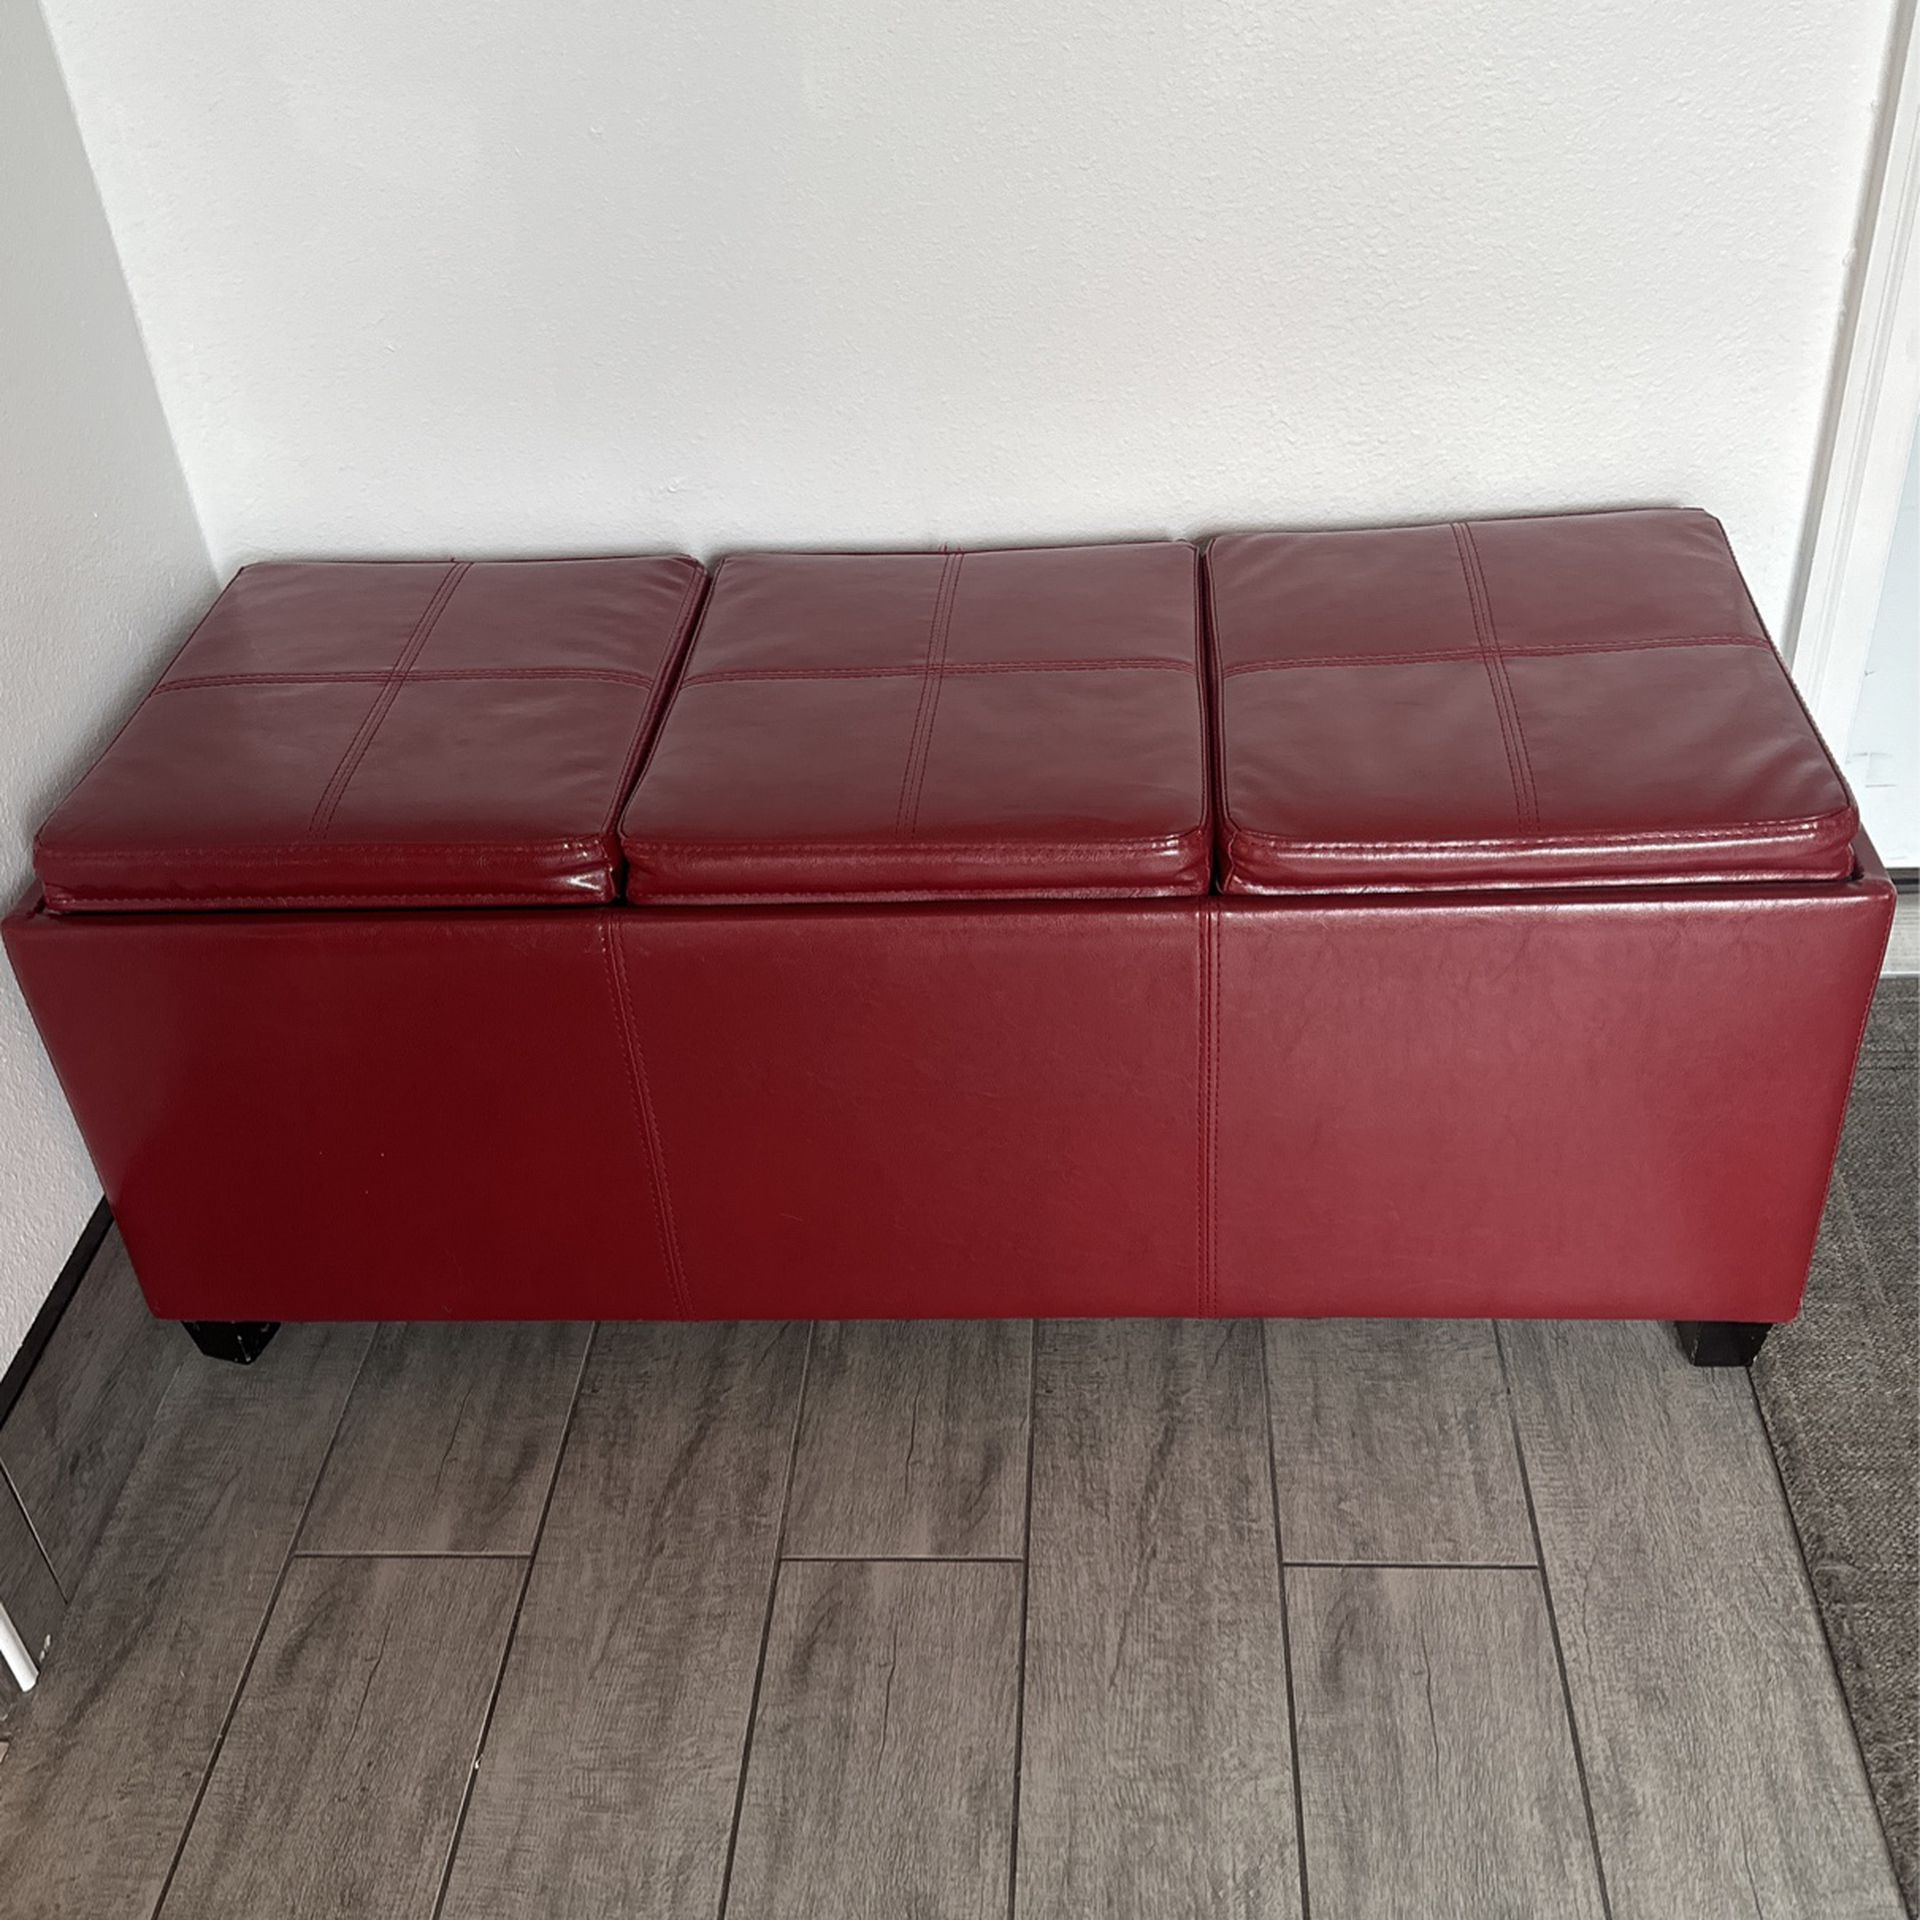 Ottoman Extremely Useful Multi Function Storage.         Ottoman 